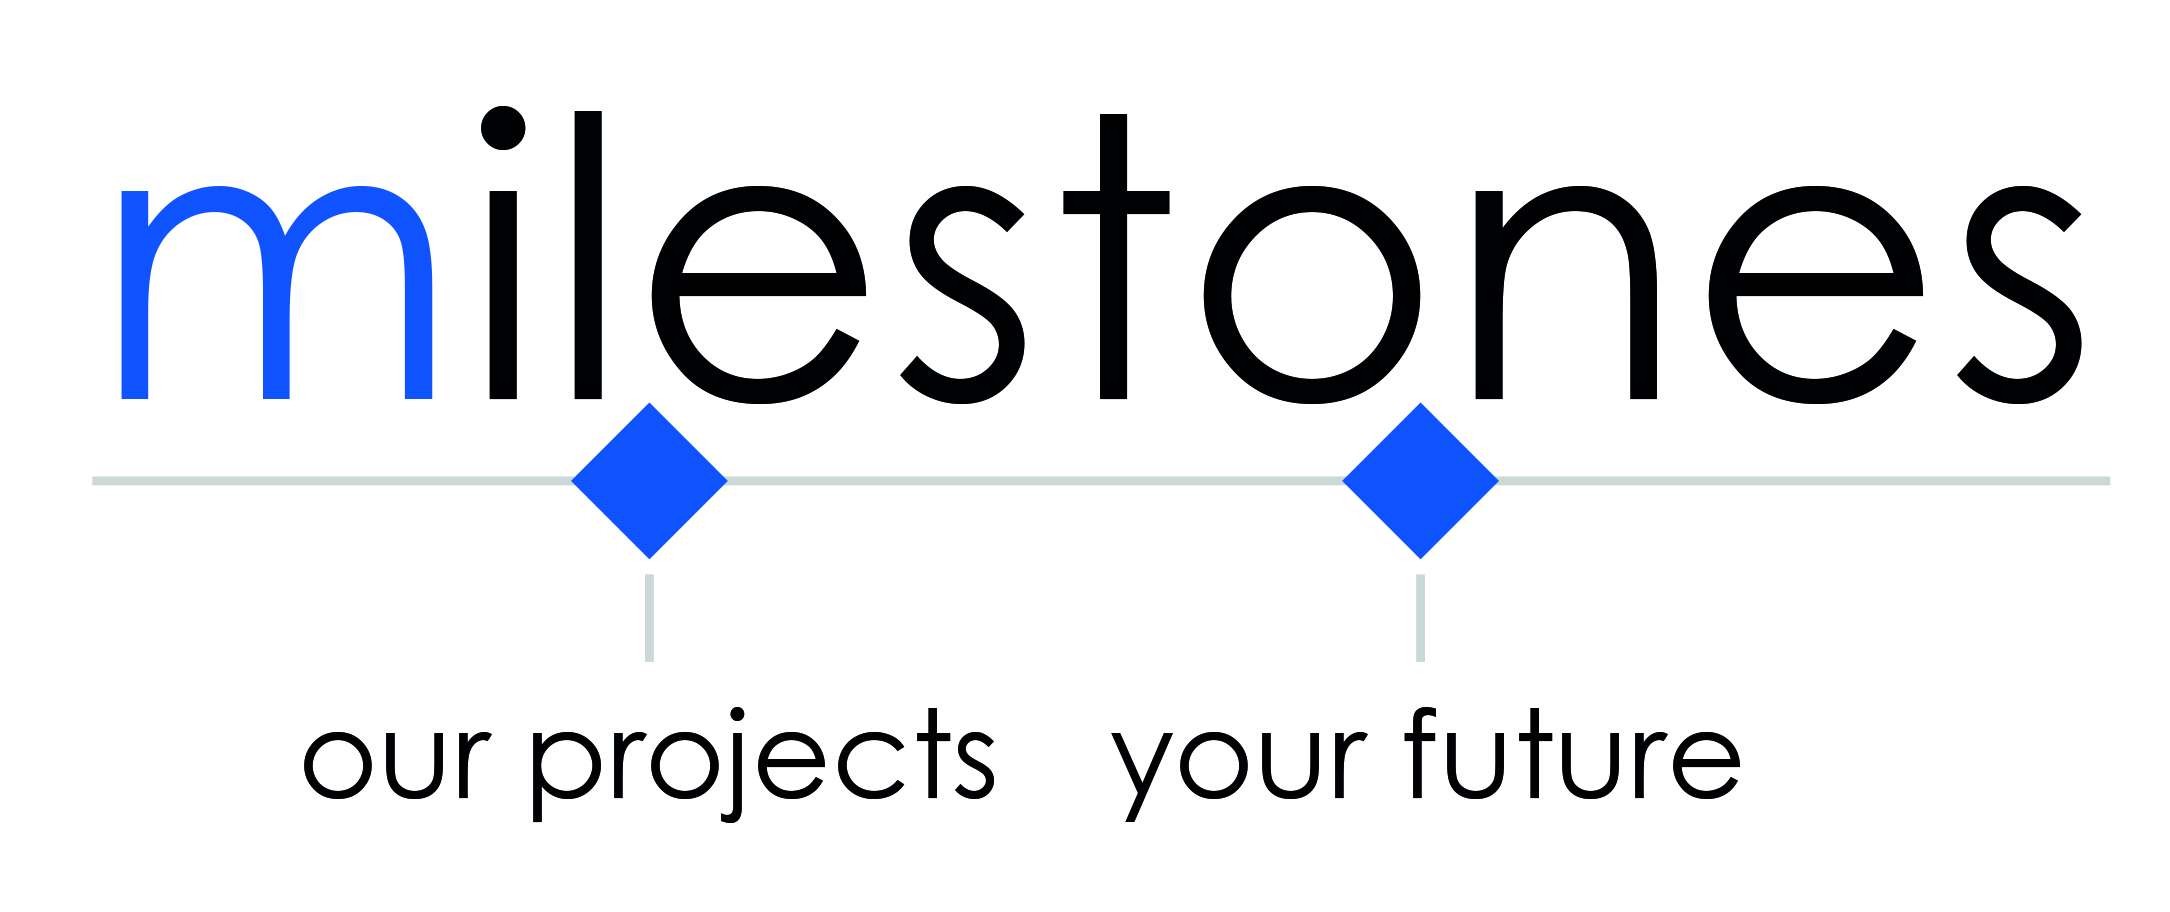 Milestones – our Projects, your Future